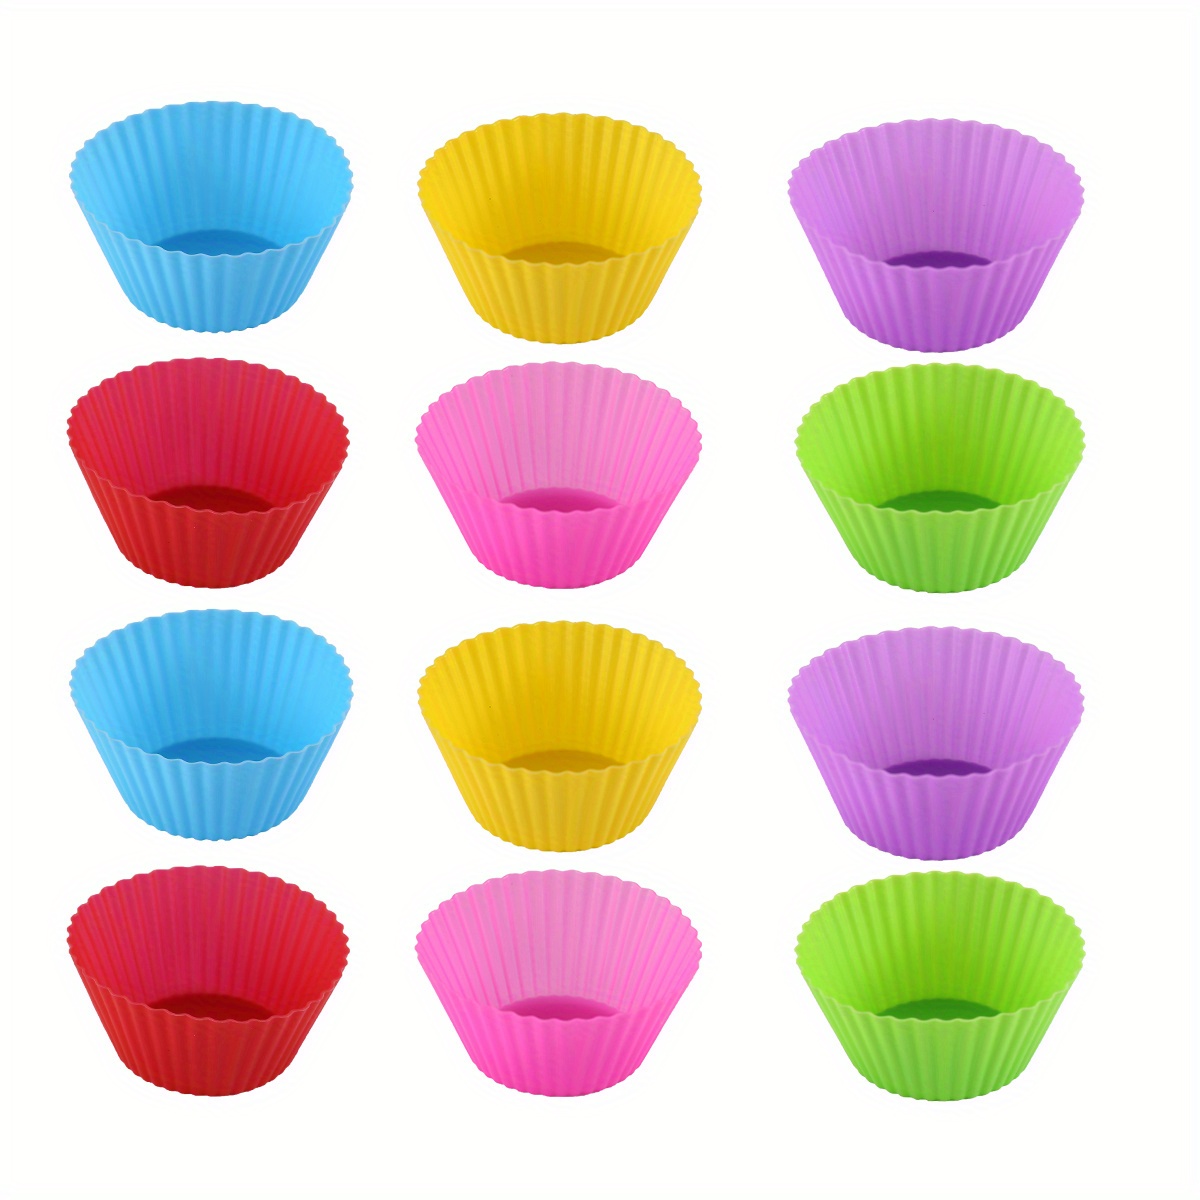 12pcs, Reusable Silicone Baking Cups, Non-stick Muffin Cups, Reusable  Cupcake Liners, Cake Molds Set, Cupcake Holder 7cm/2.8